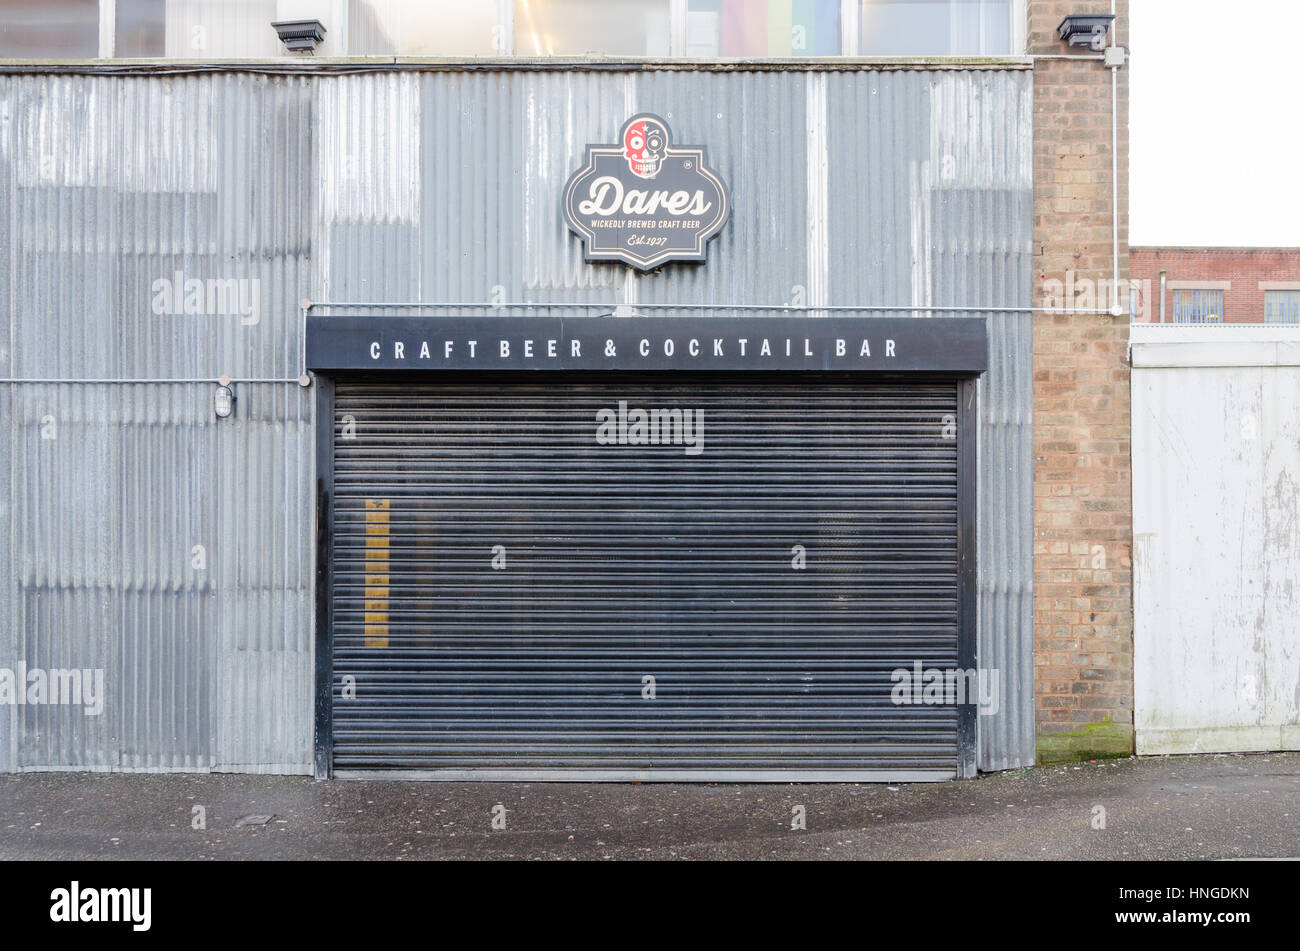 Dare's Bar in Lower Essex Street, Birmingham which is in an old industrial unit clad in corrugated iron Stock Photo